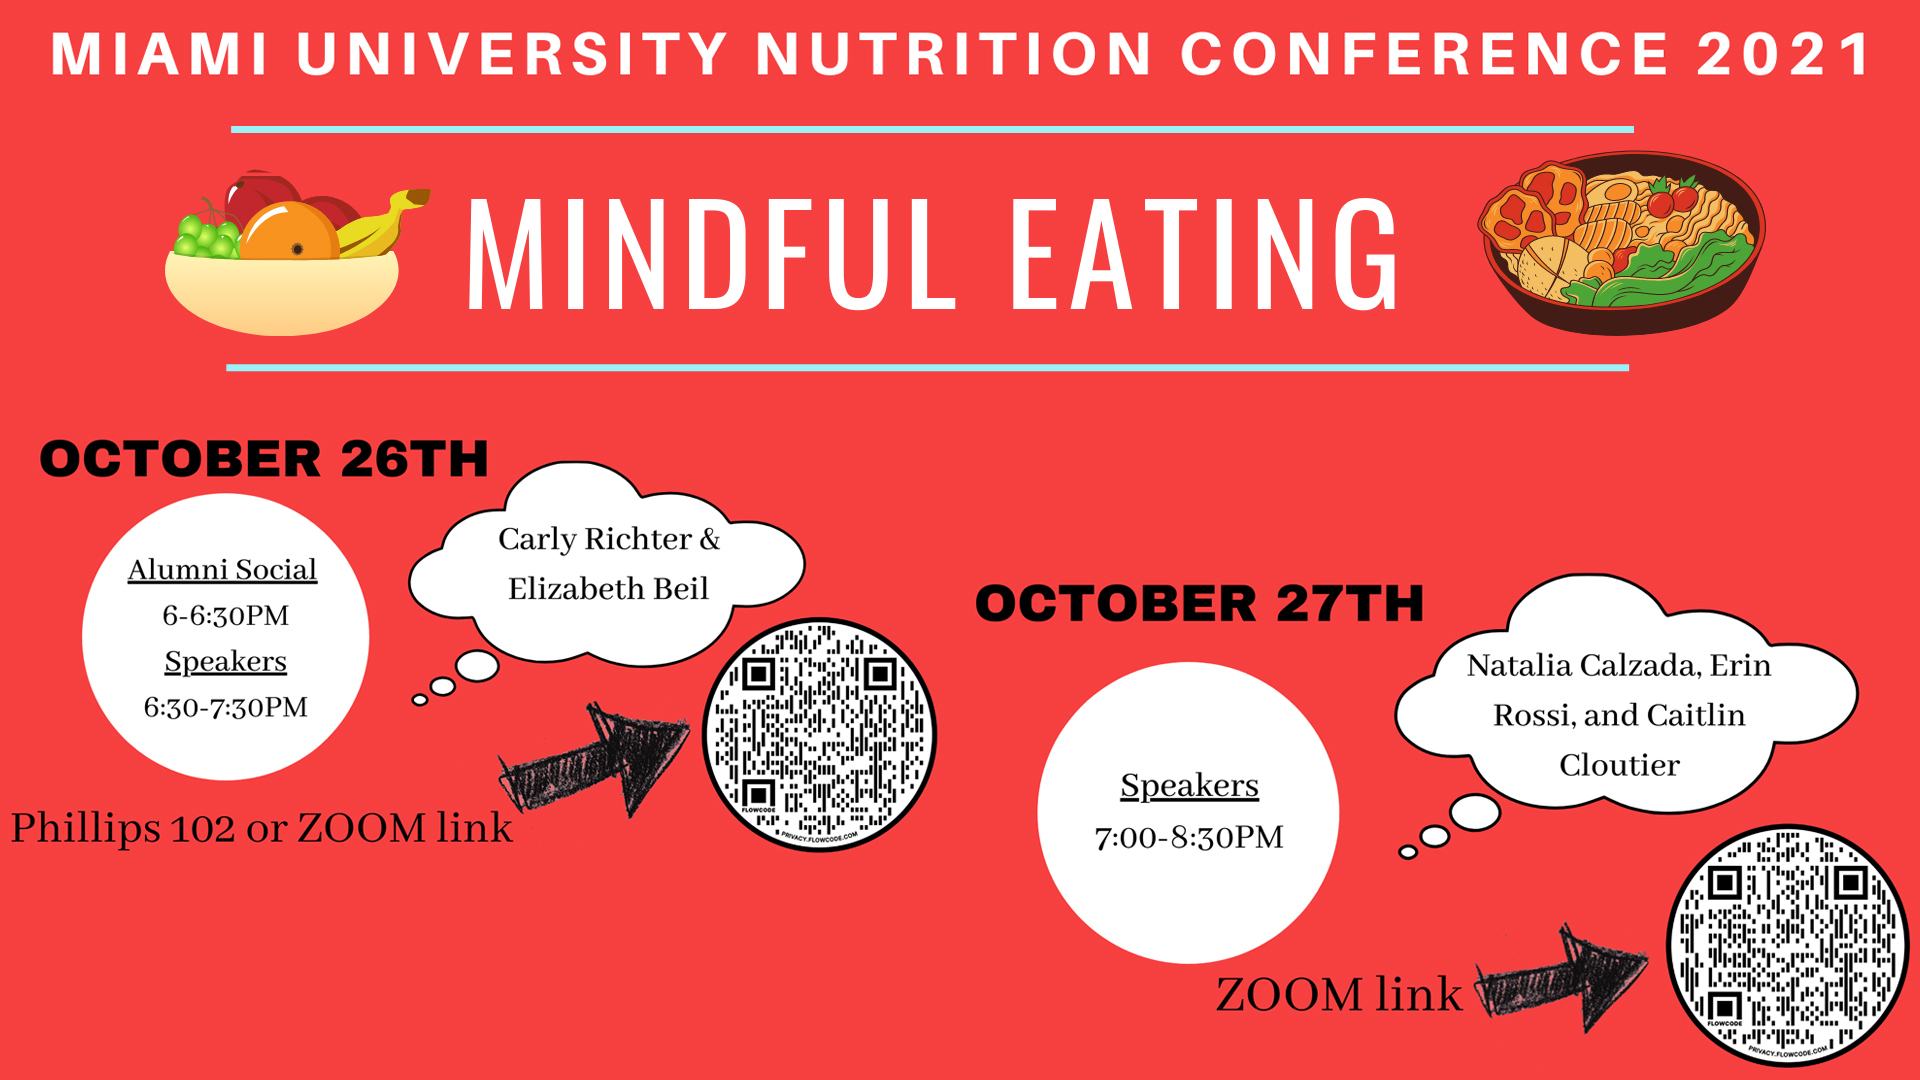 Miami University Nutrition Conference 2021. Mindful Eating. 